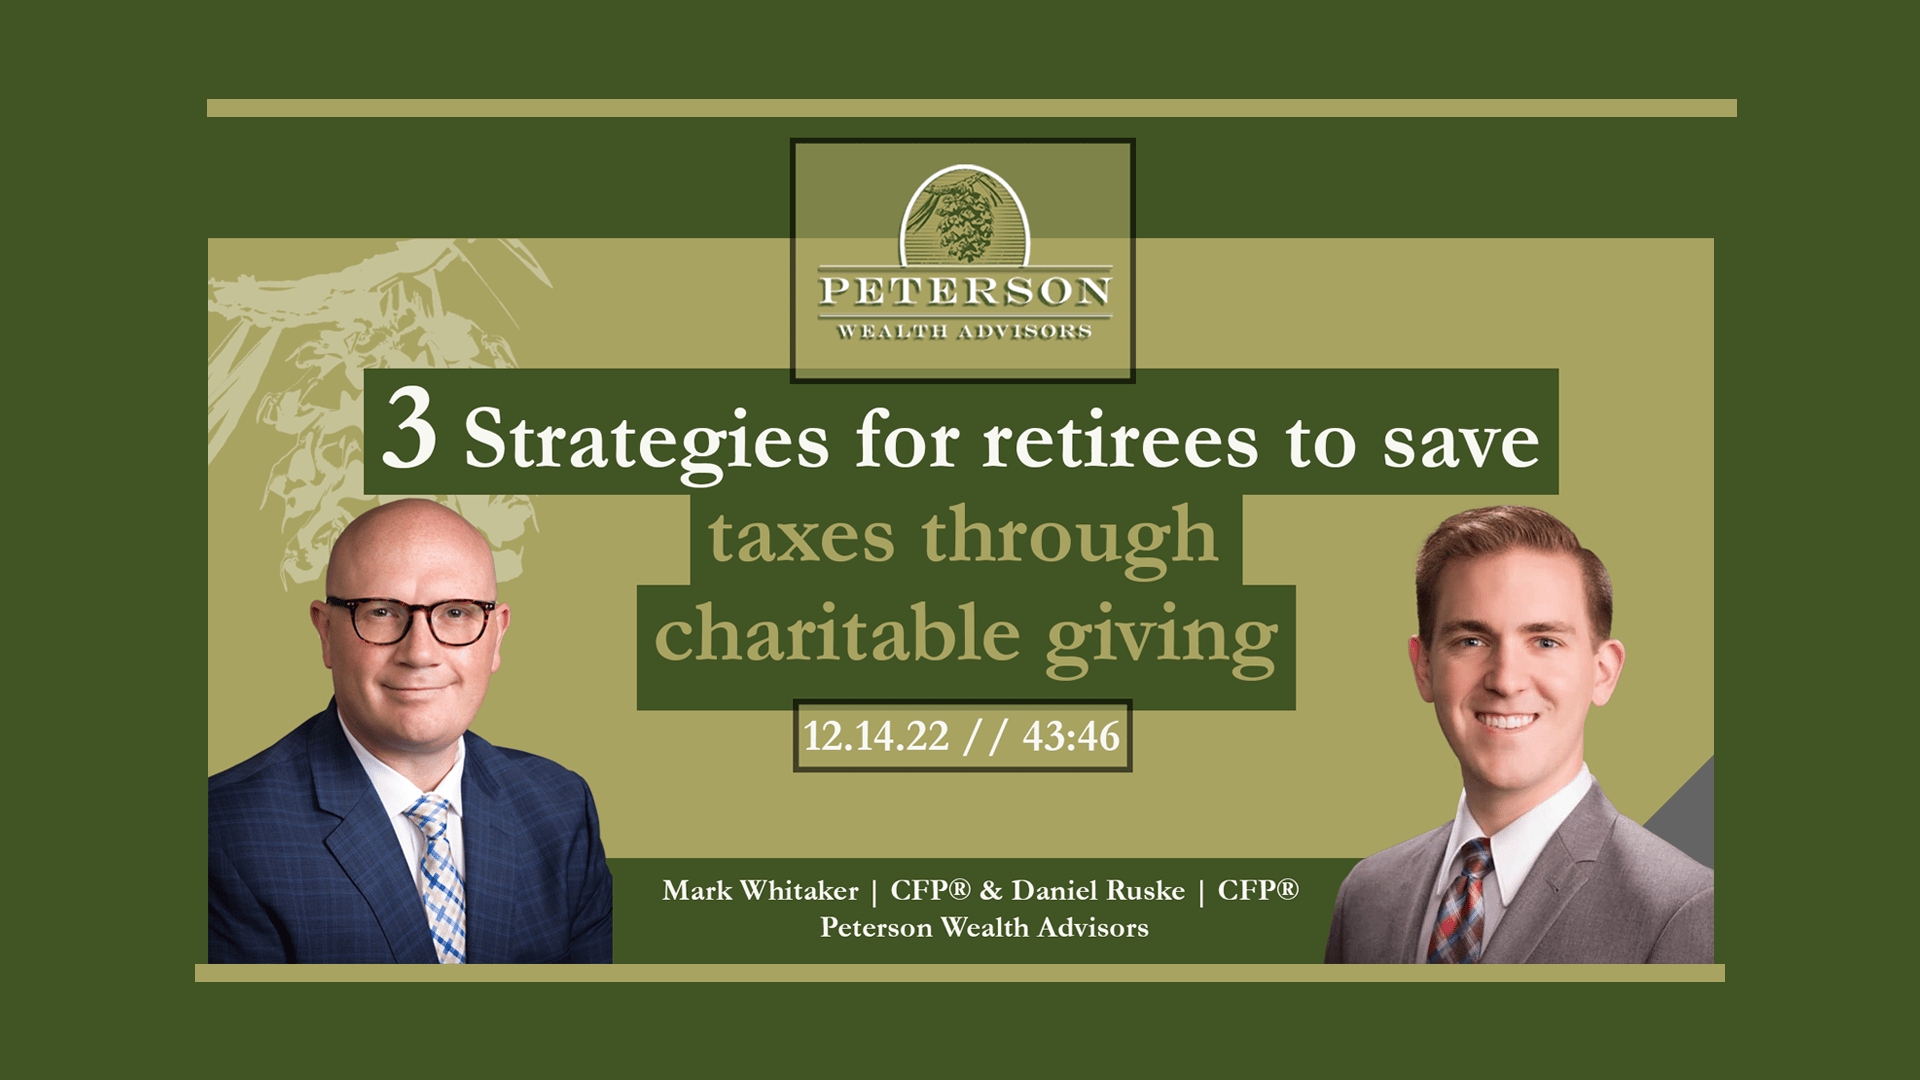 3 Strategies for retirees to save taxes through charitable giving